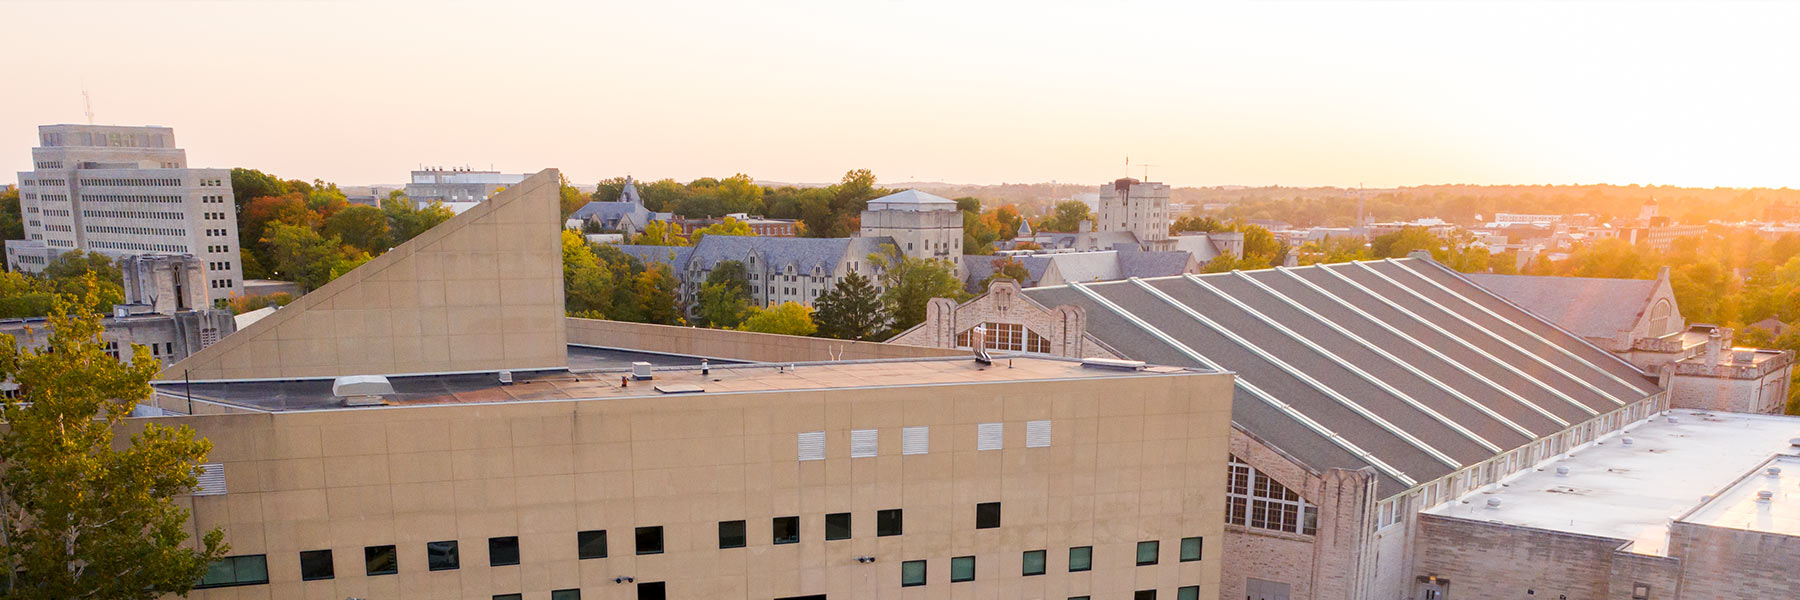 Drone view of the sun setting over the Eskenazi Art Museum and School of Public Health.